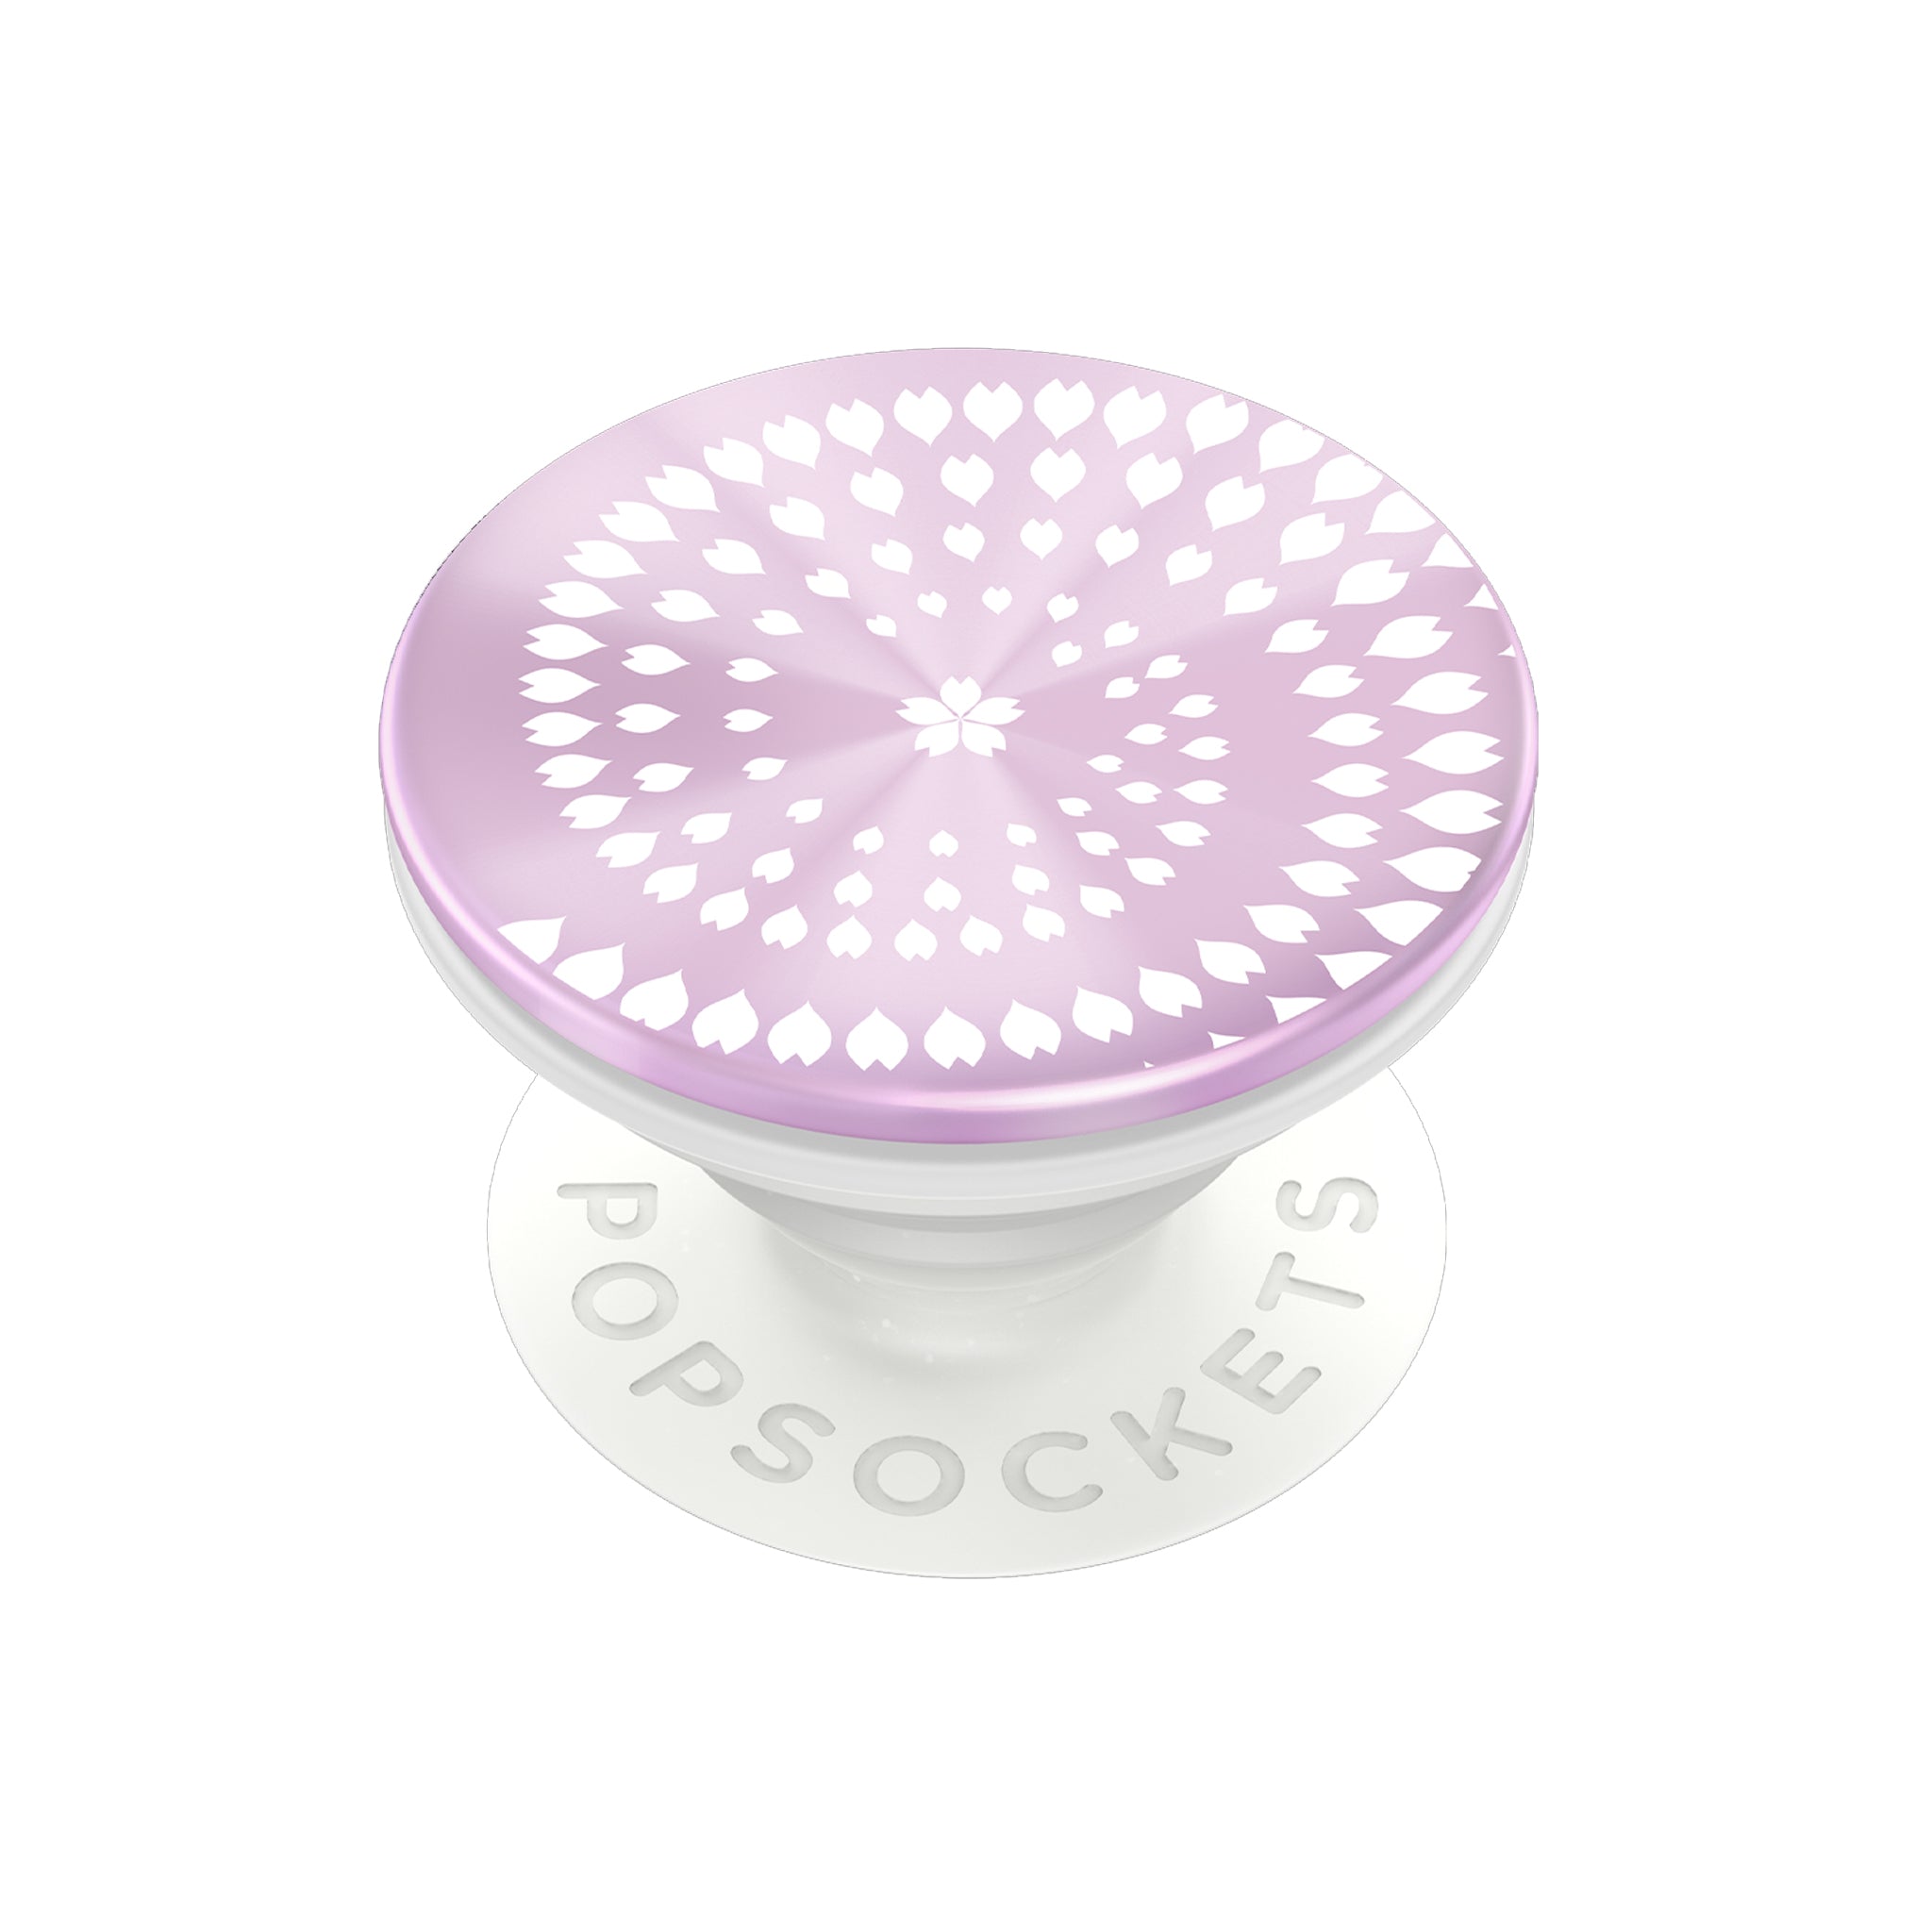 Popsockets - Popgrip Premium Backspin Swappable Device Stand And Grip - Infinite Blossom